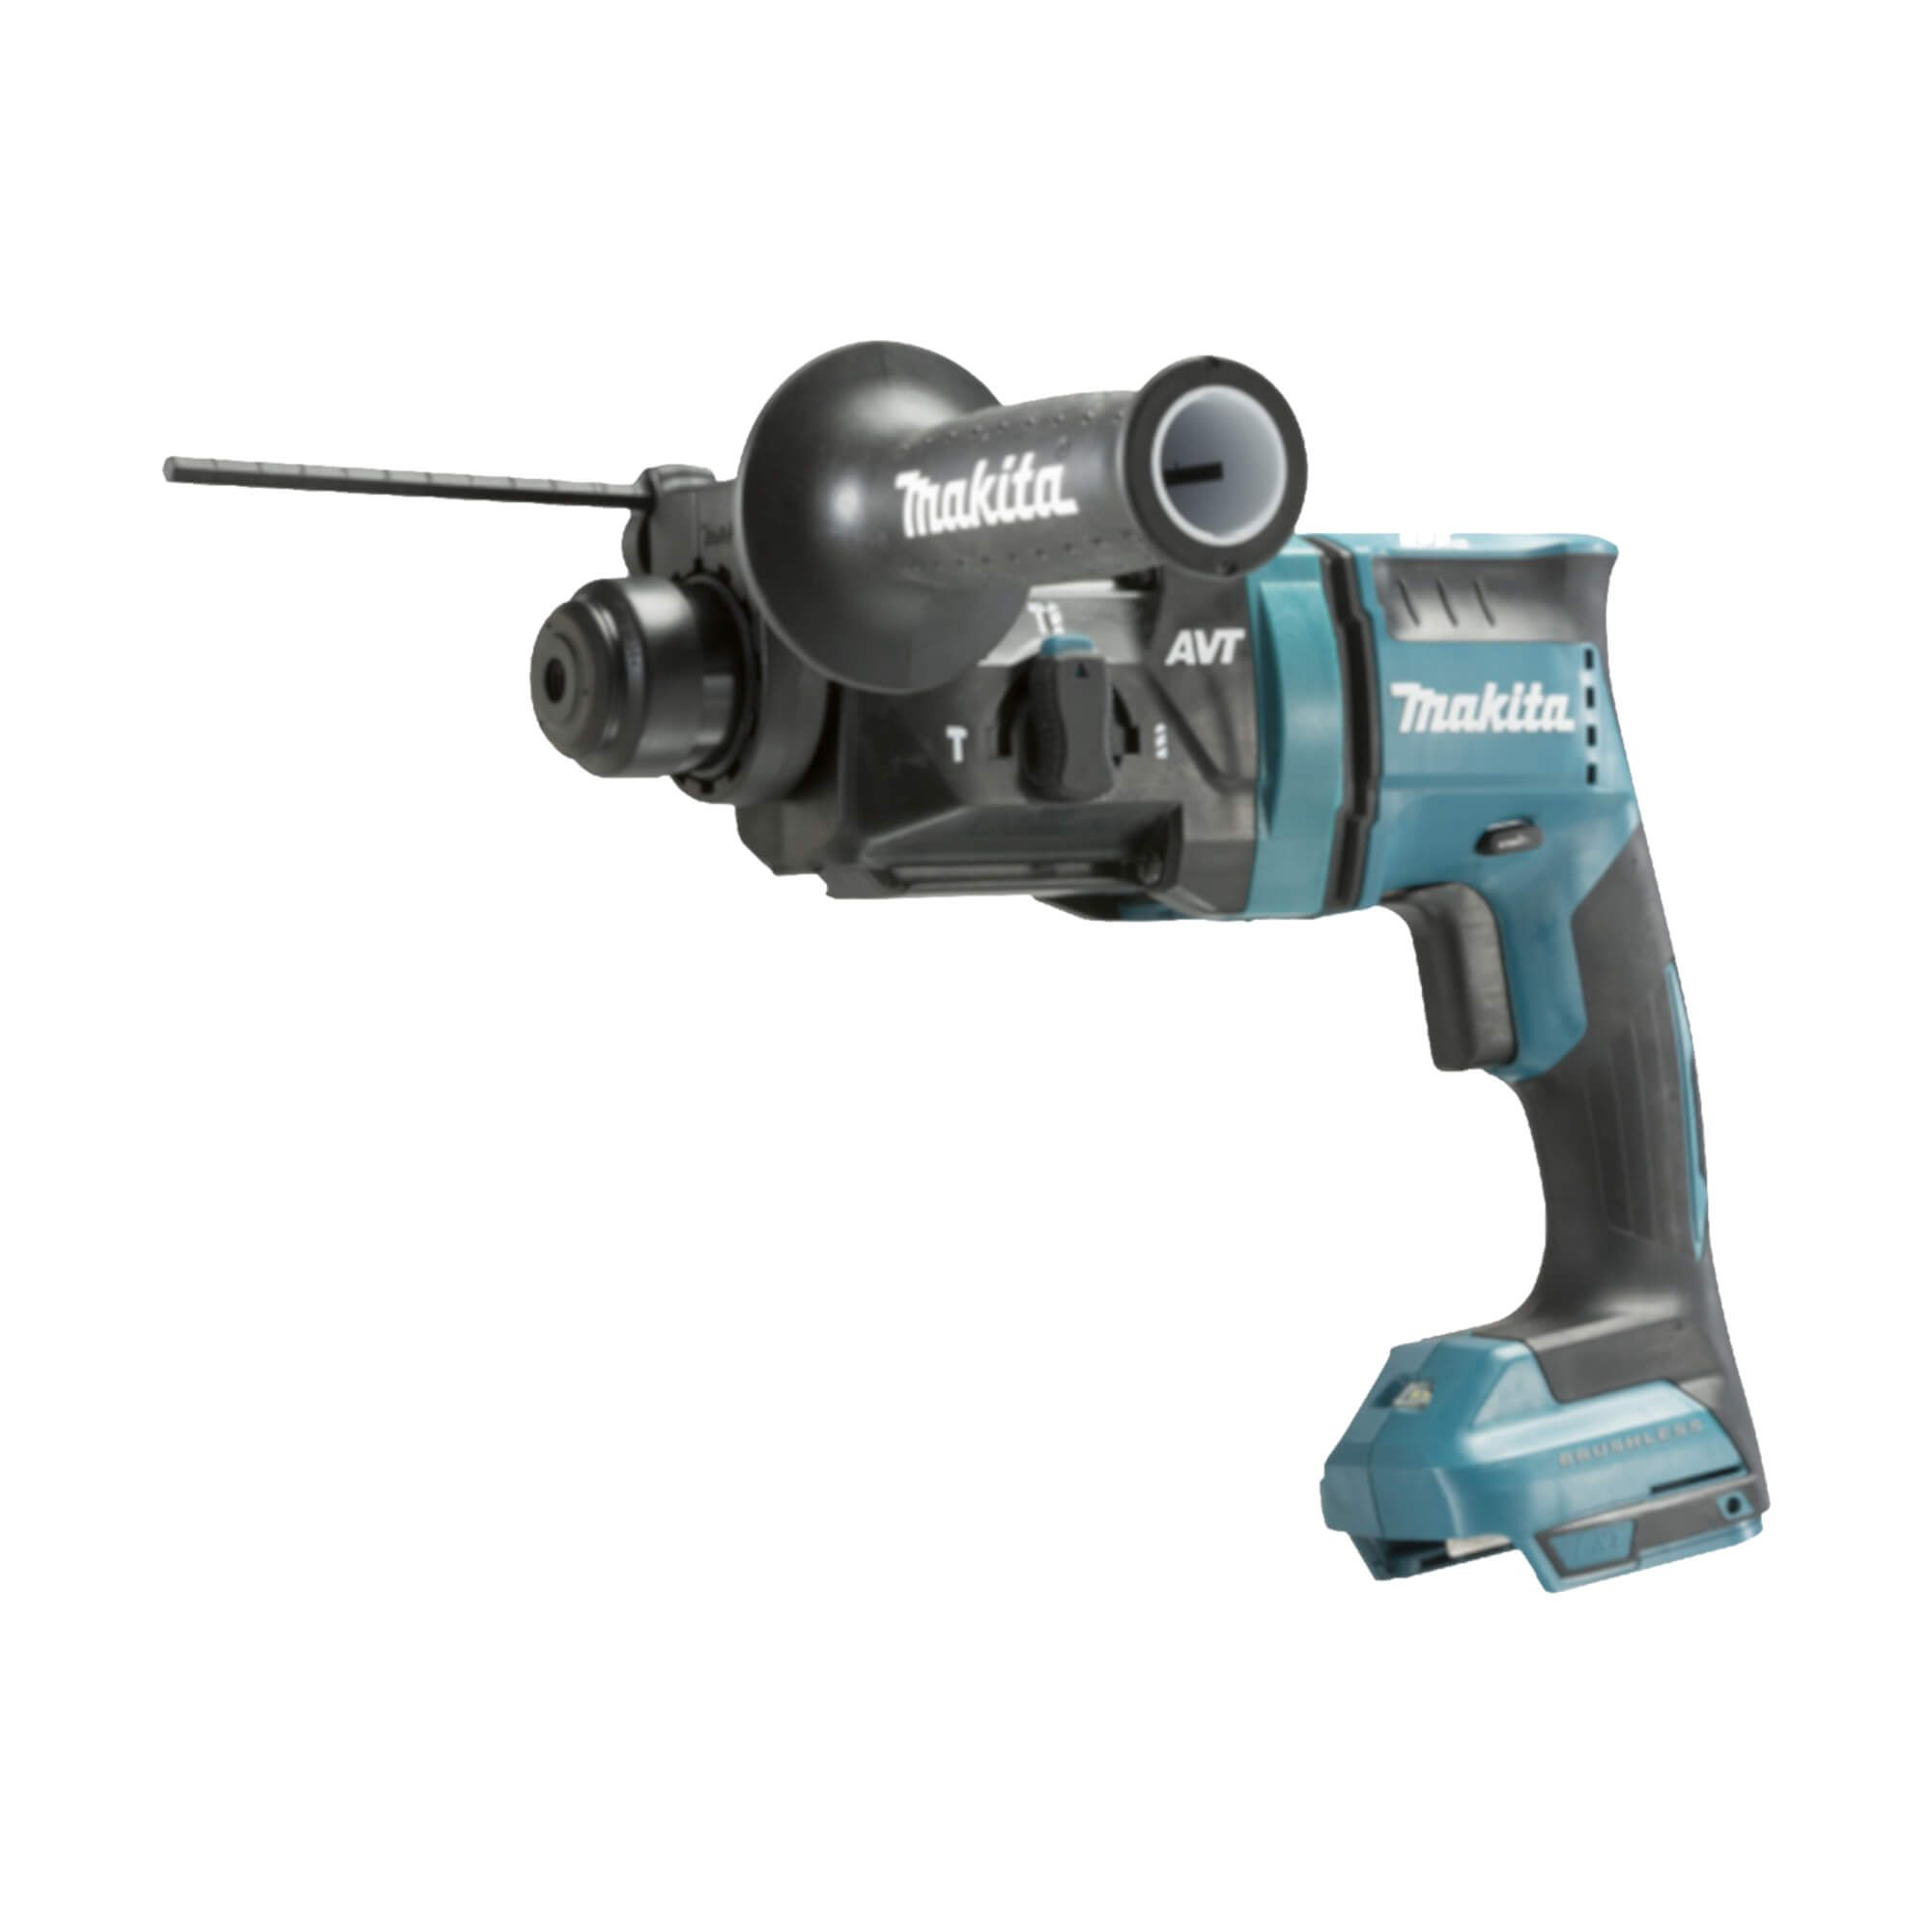 Makita 18V Lxt Brushless Rotary Hammer Sds Drill - Body Only à Makita Sds Drill